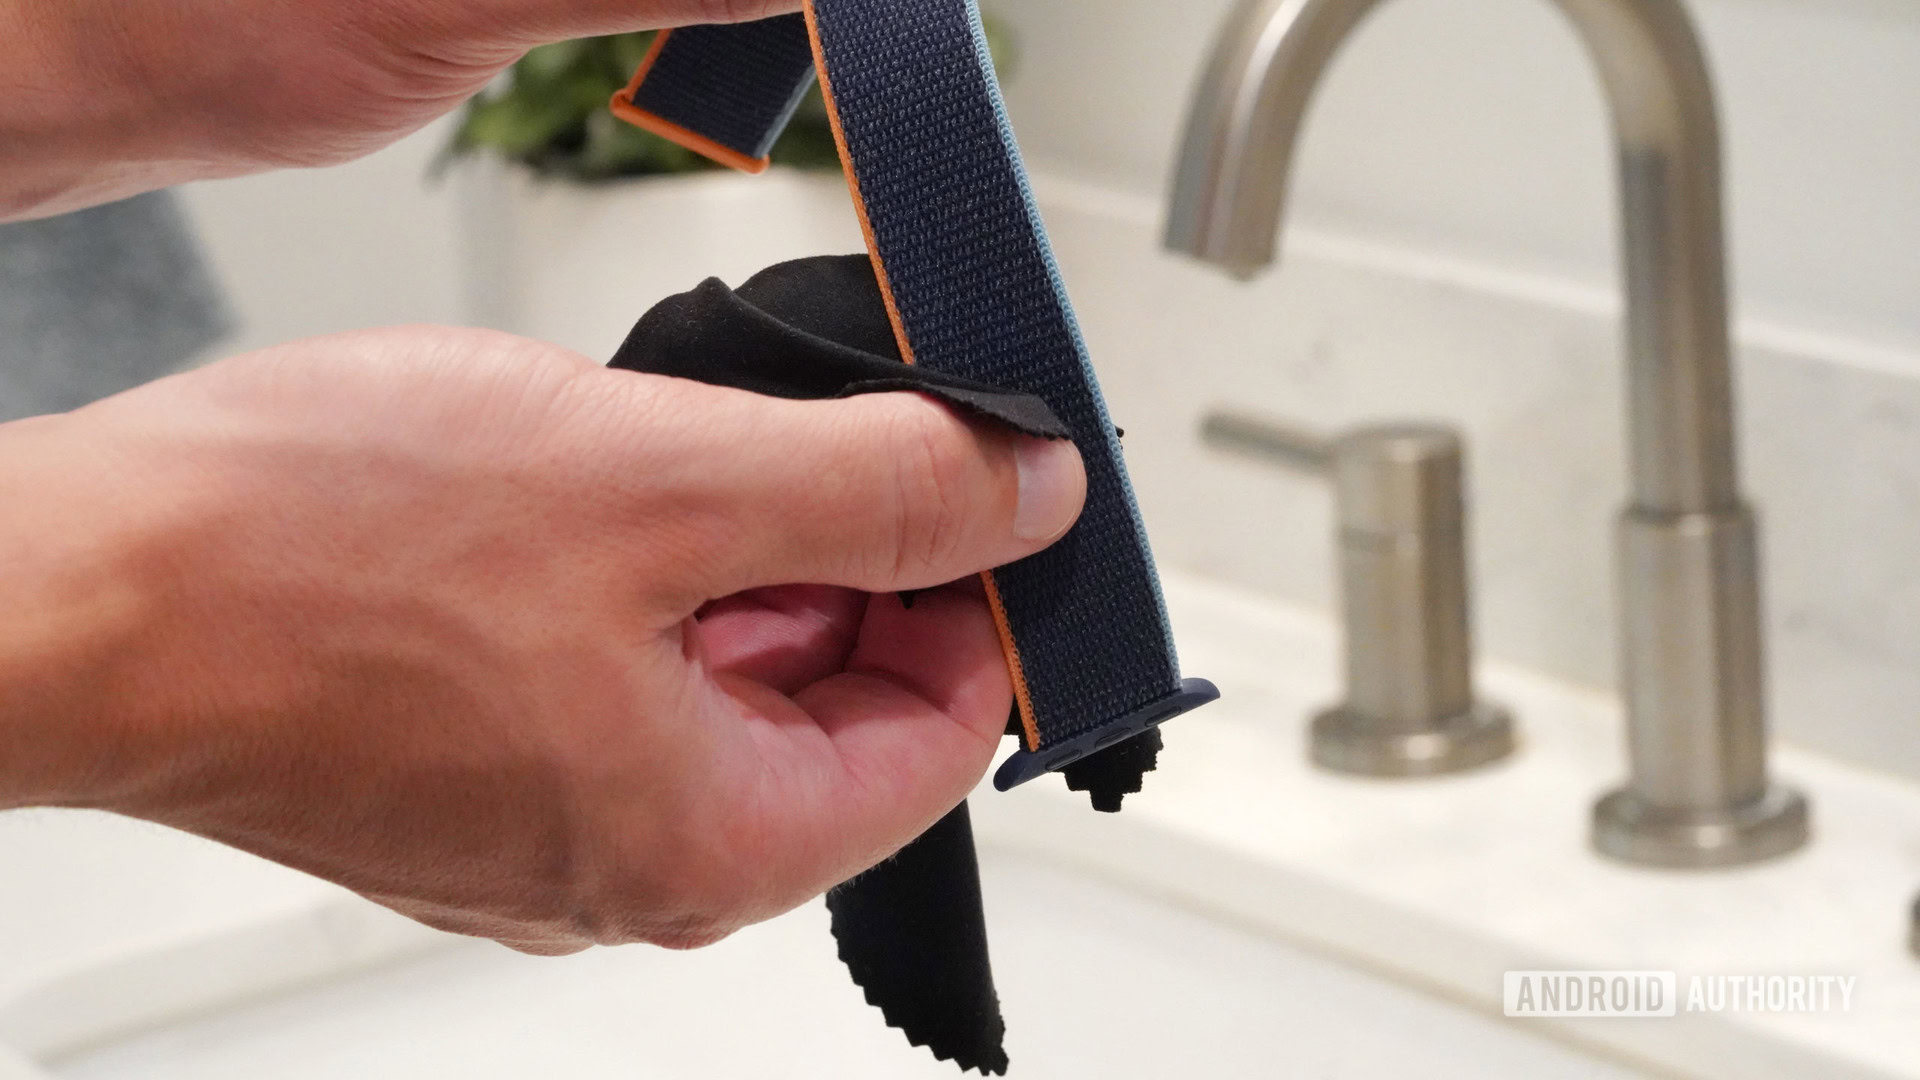 Male hands clean a nylon Apple Watch band with a nonabrasive, lint-free cloth.